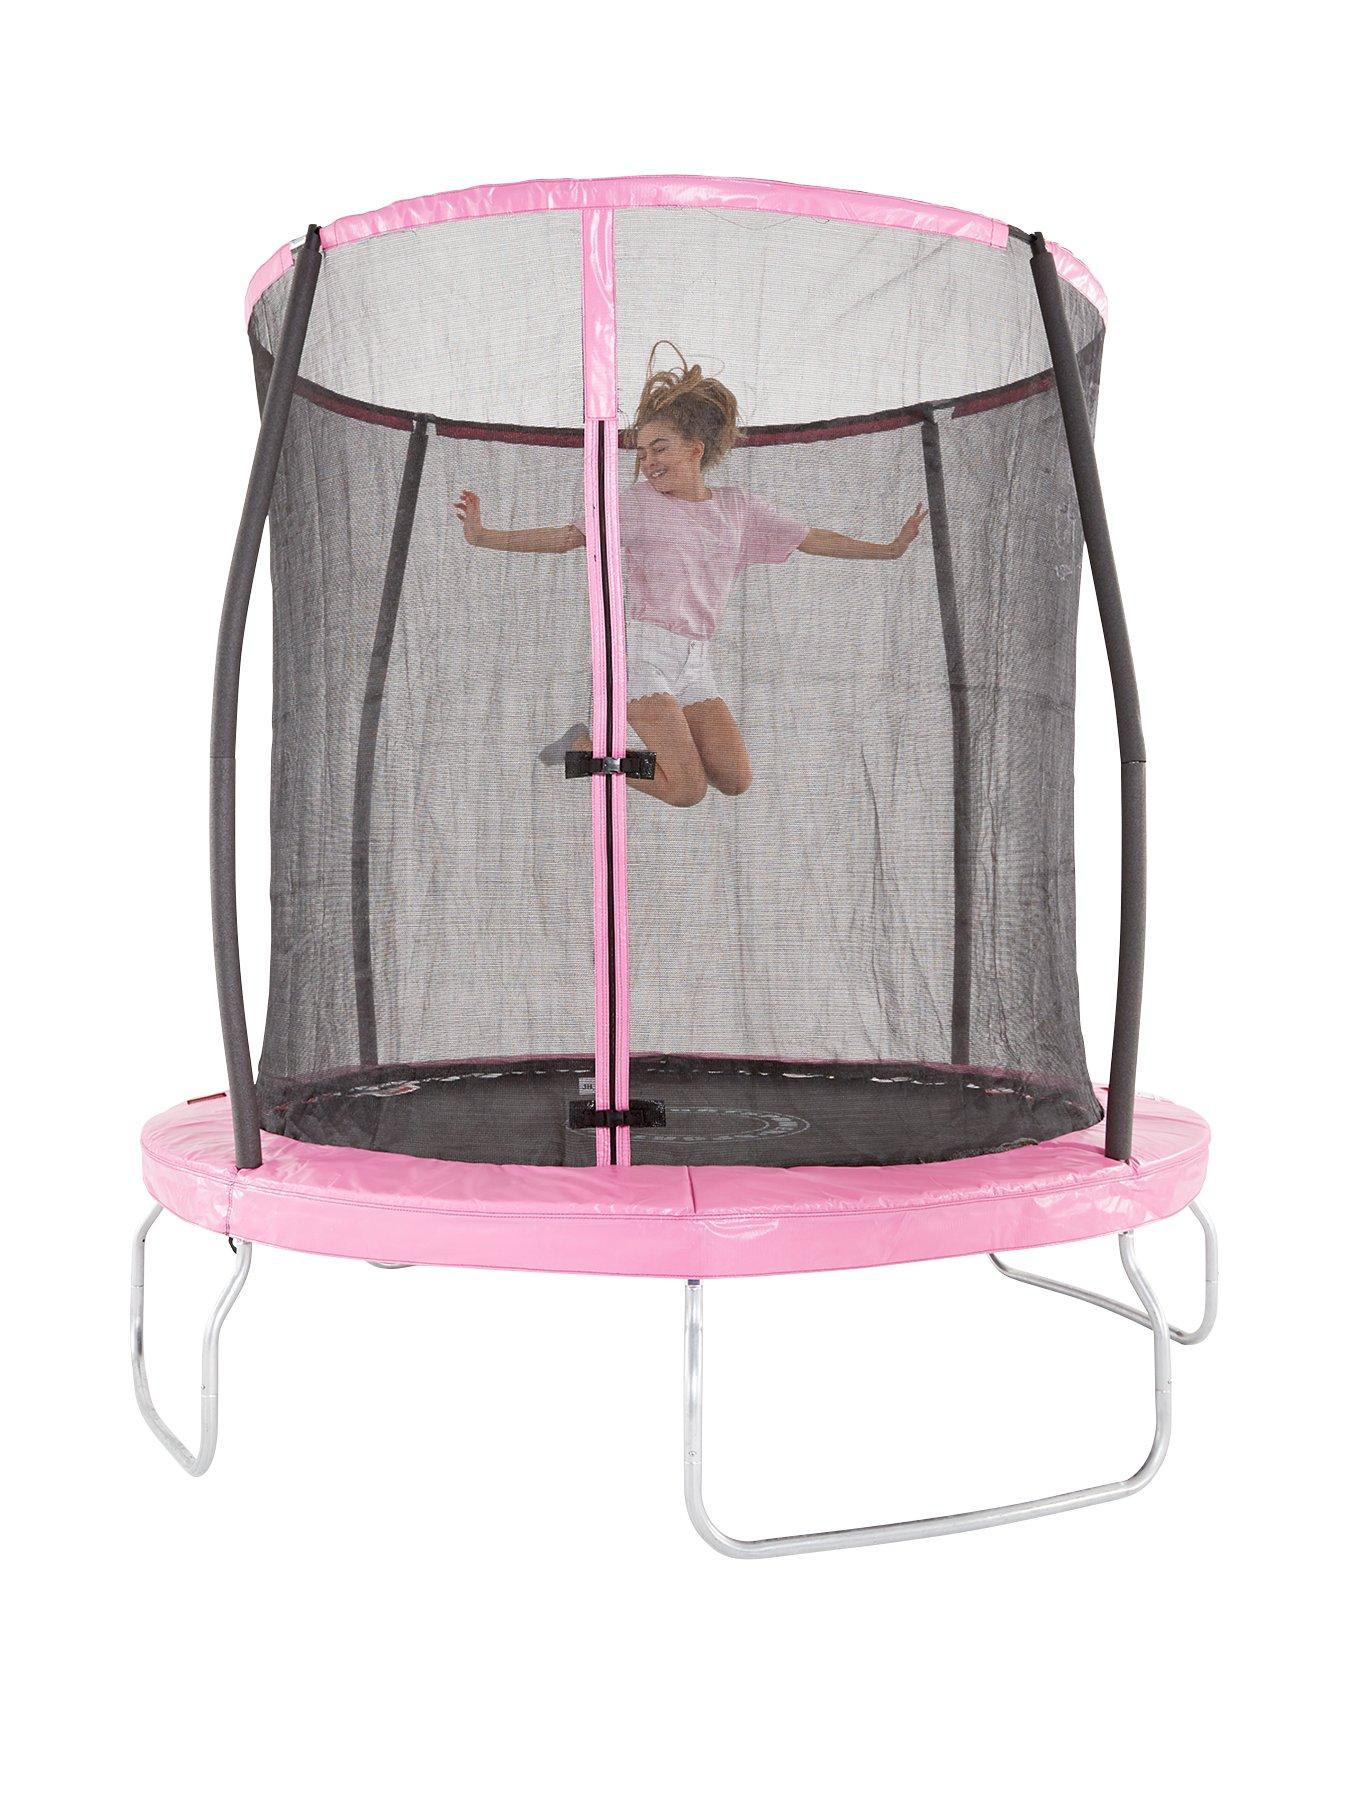 Indoor or Outdoor Trampoline for Kids-Colorful… BSPORTY 4.5 FT Trampoline with Safety Enclosure 